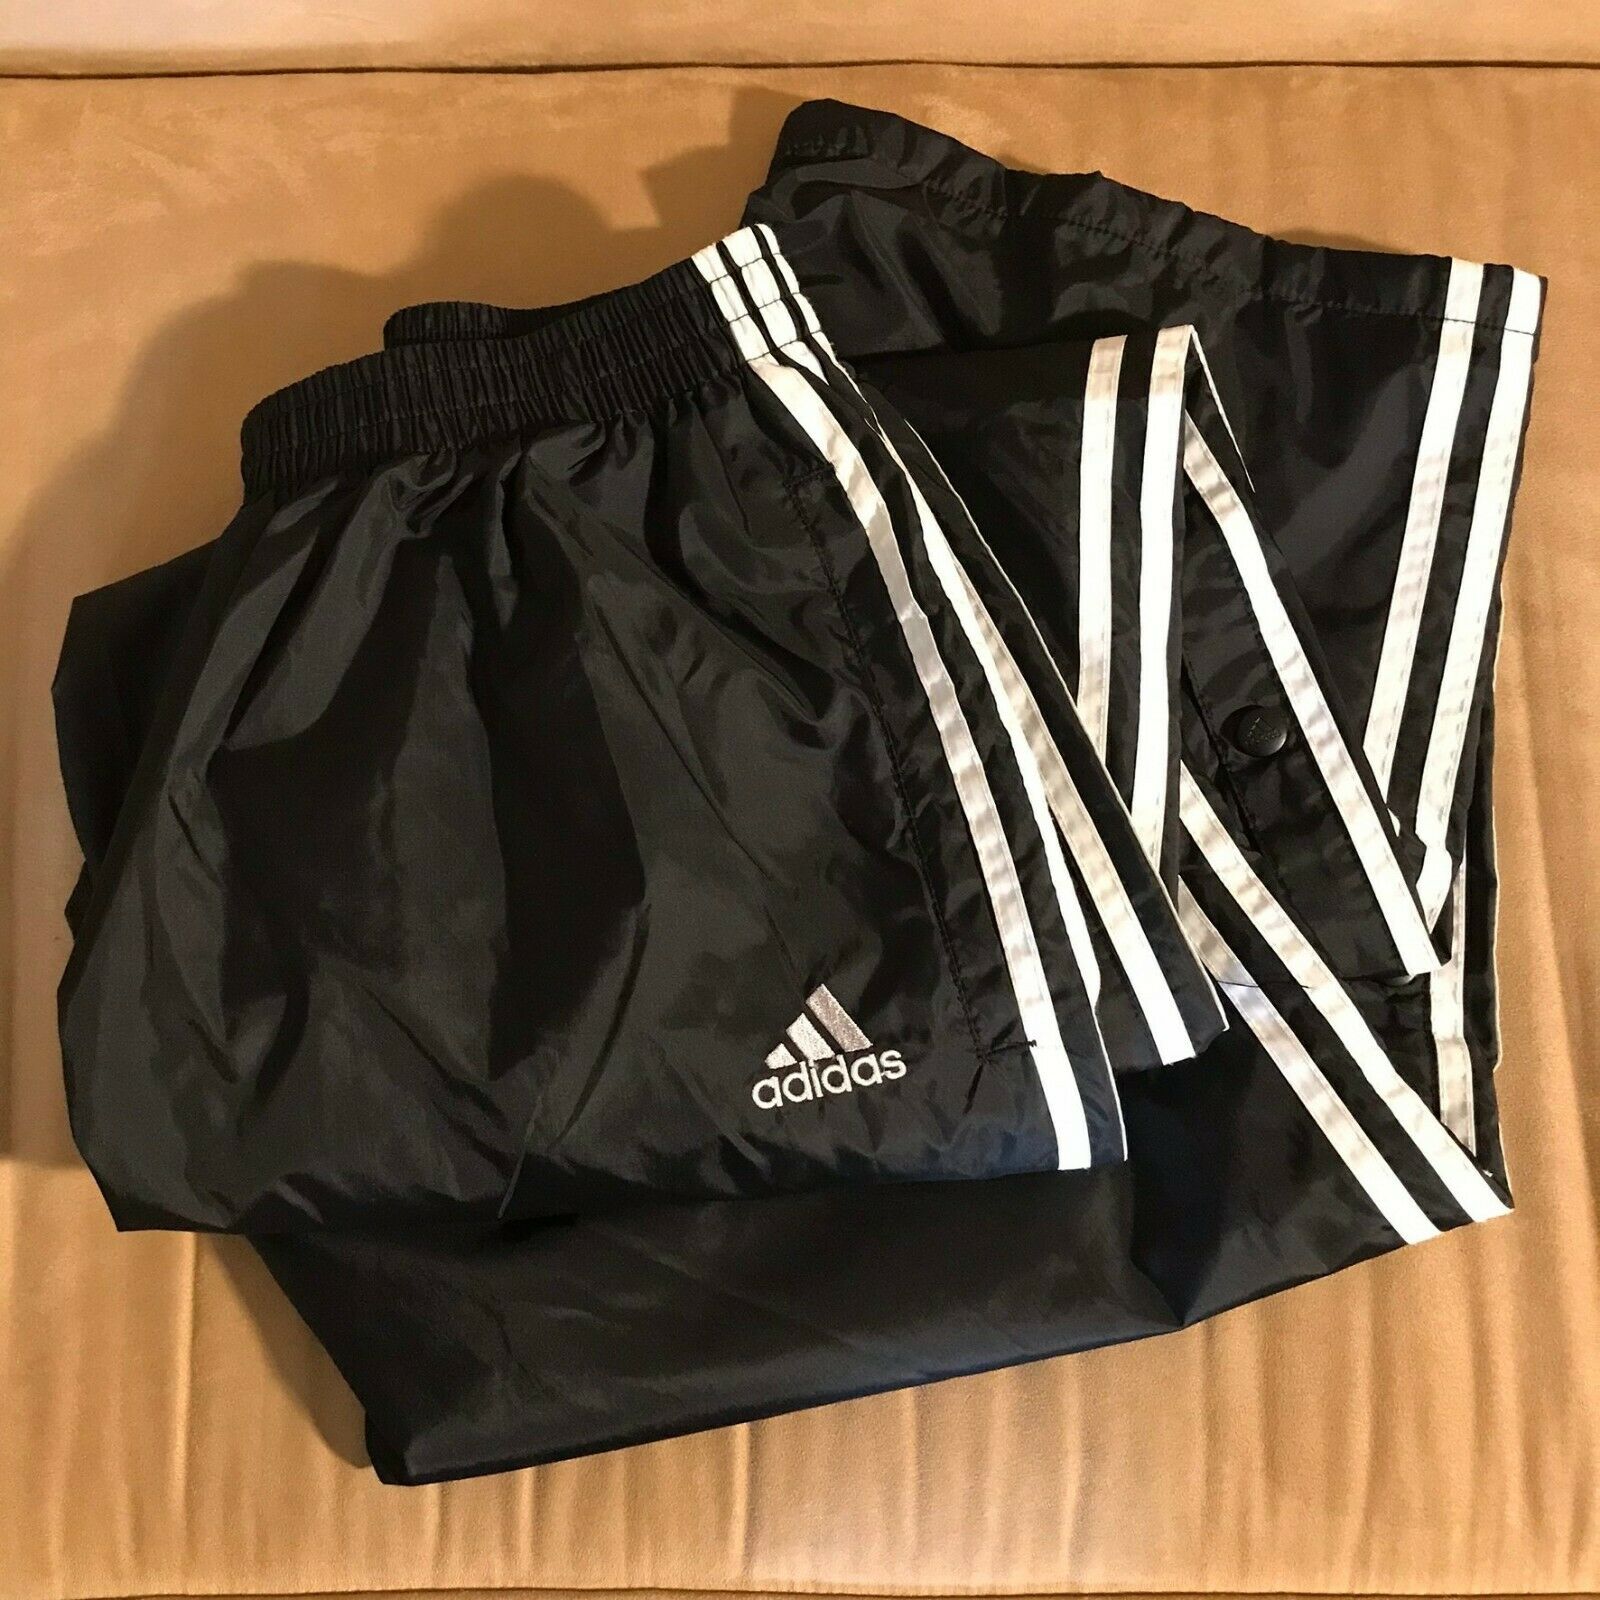 Adidas Youth Snap-open Leg Warm-up Track Pants Black White Stripes Lined Xl